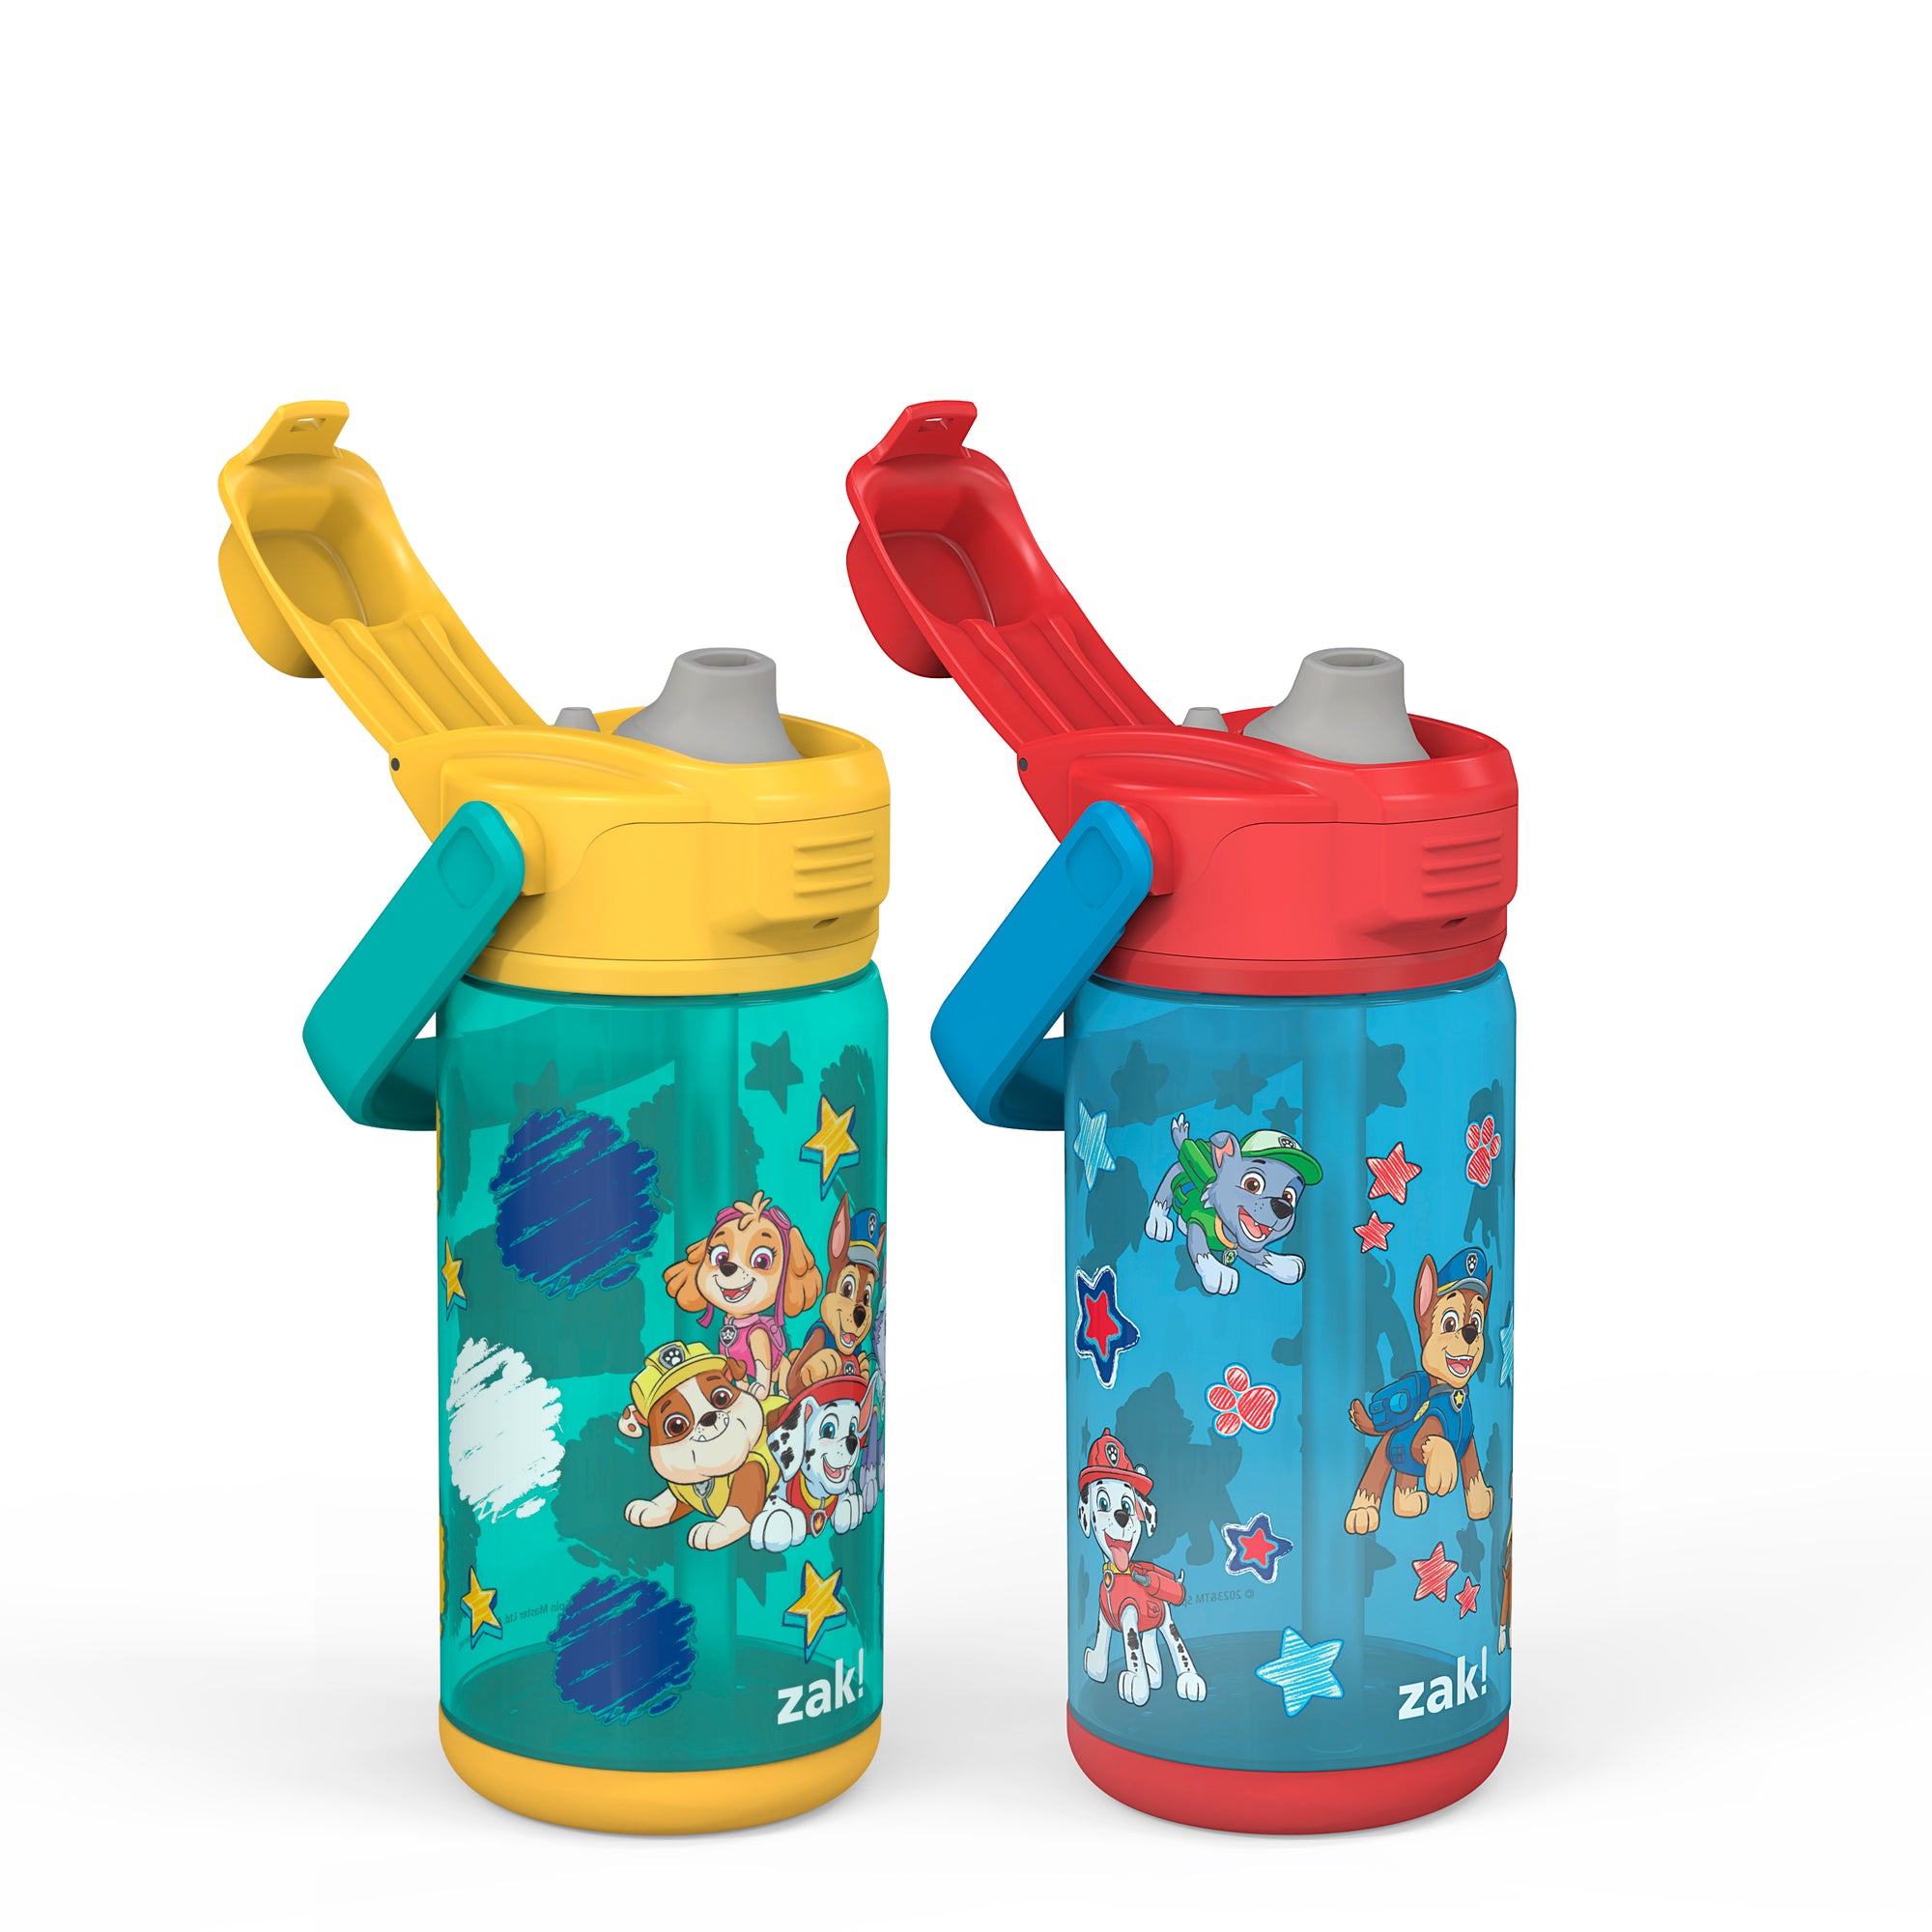 PAW Patrol Beacon 2-Piece Kids Water Bottle Set with Covered Spout, 16 Ounces